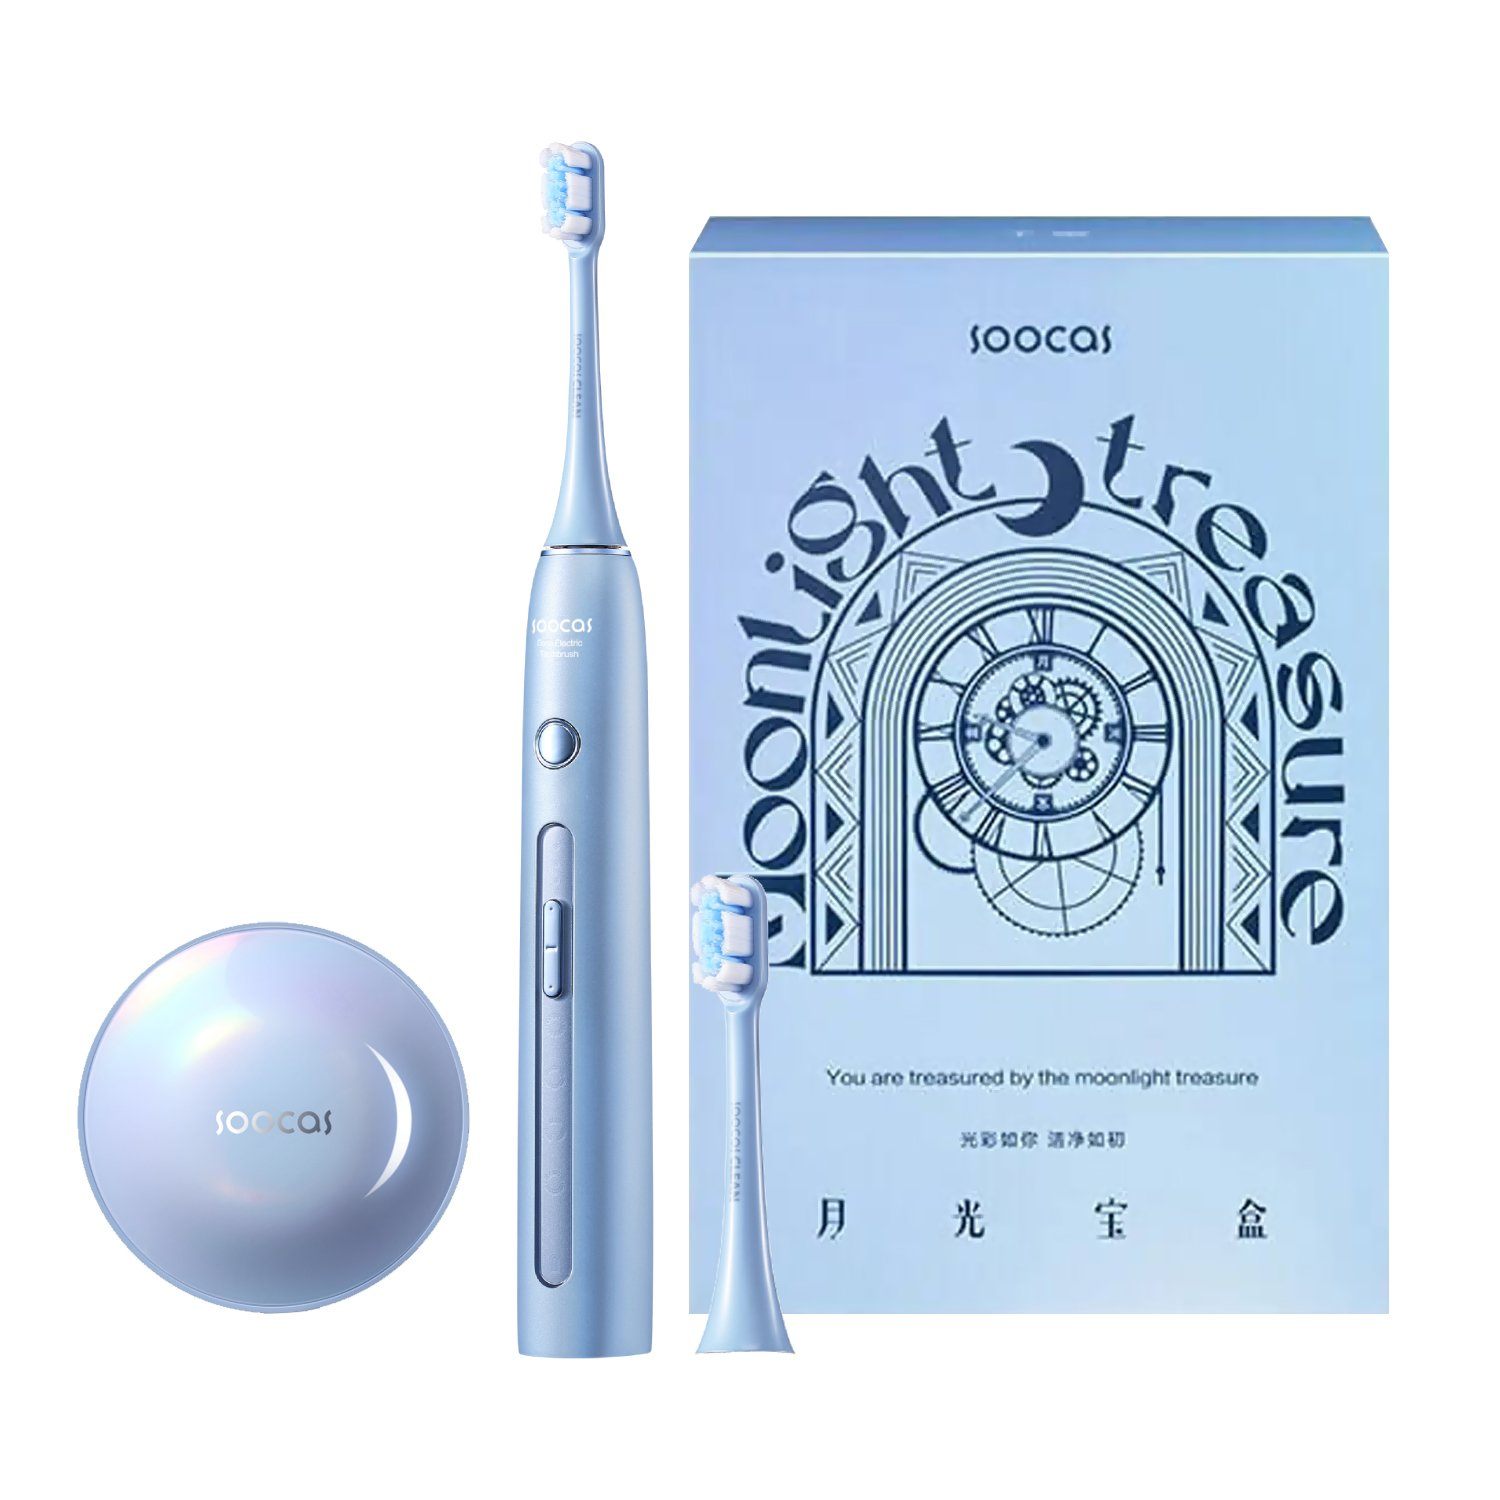 SOOCAS X3Pro Sonic Electric Toothbrush Whitening Sterilization with UVC Disinfection Box Default SOOCAS Blue 